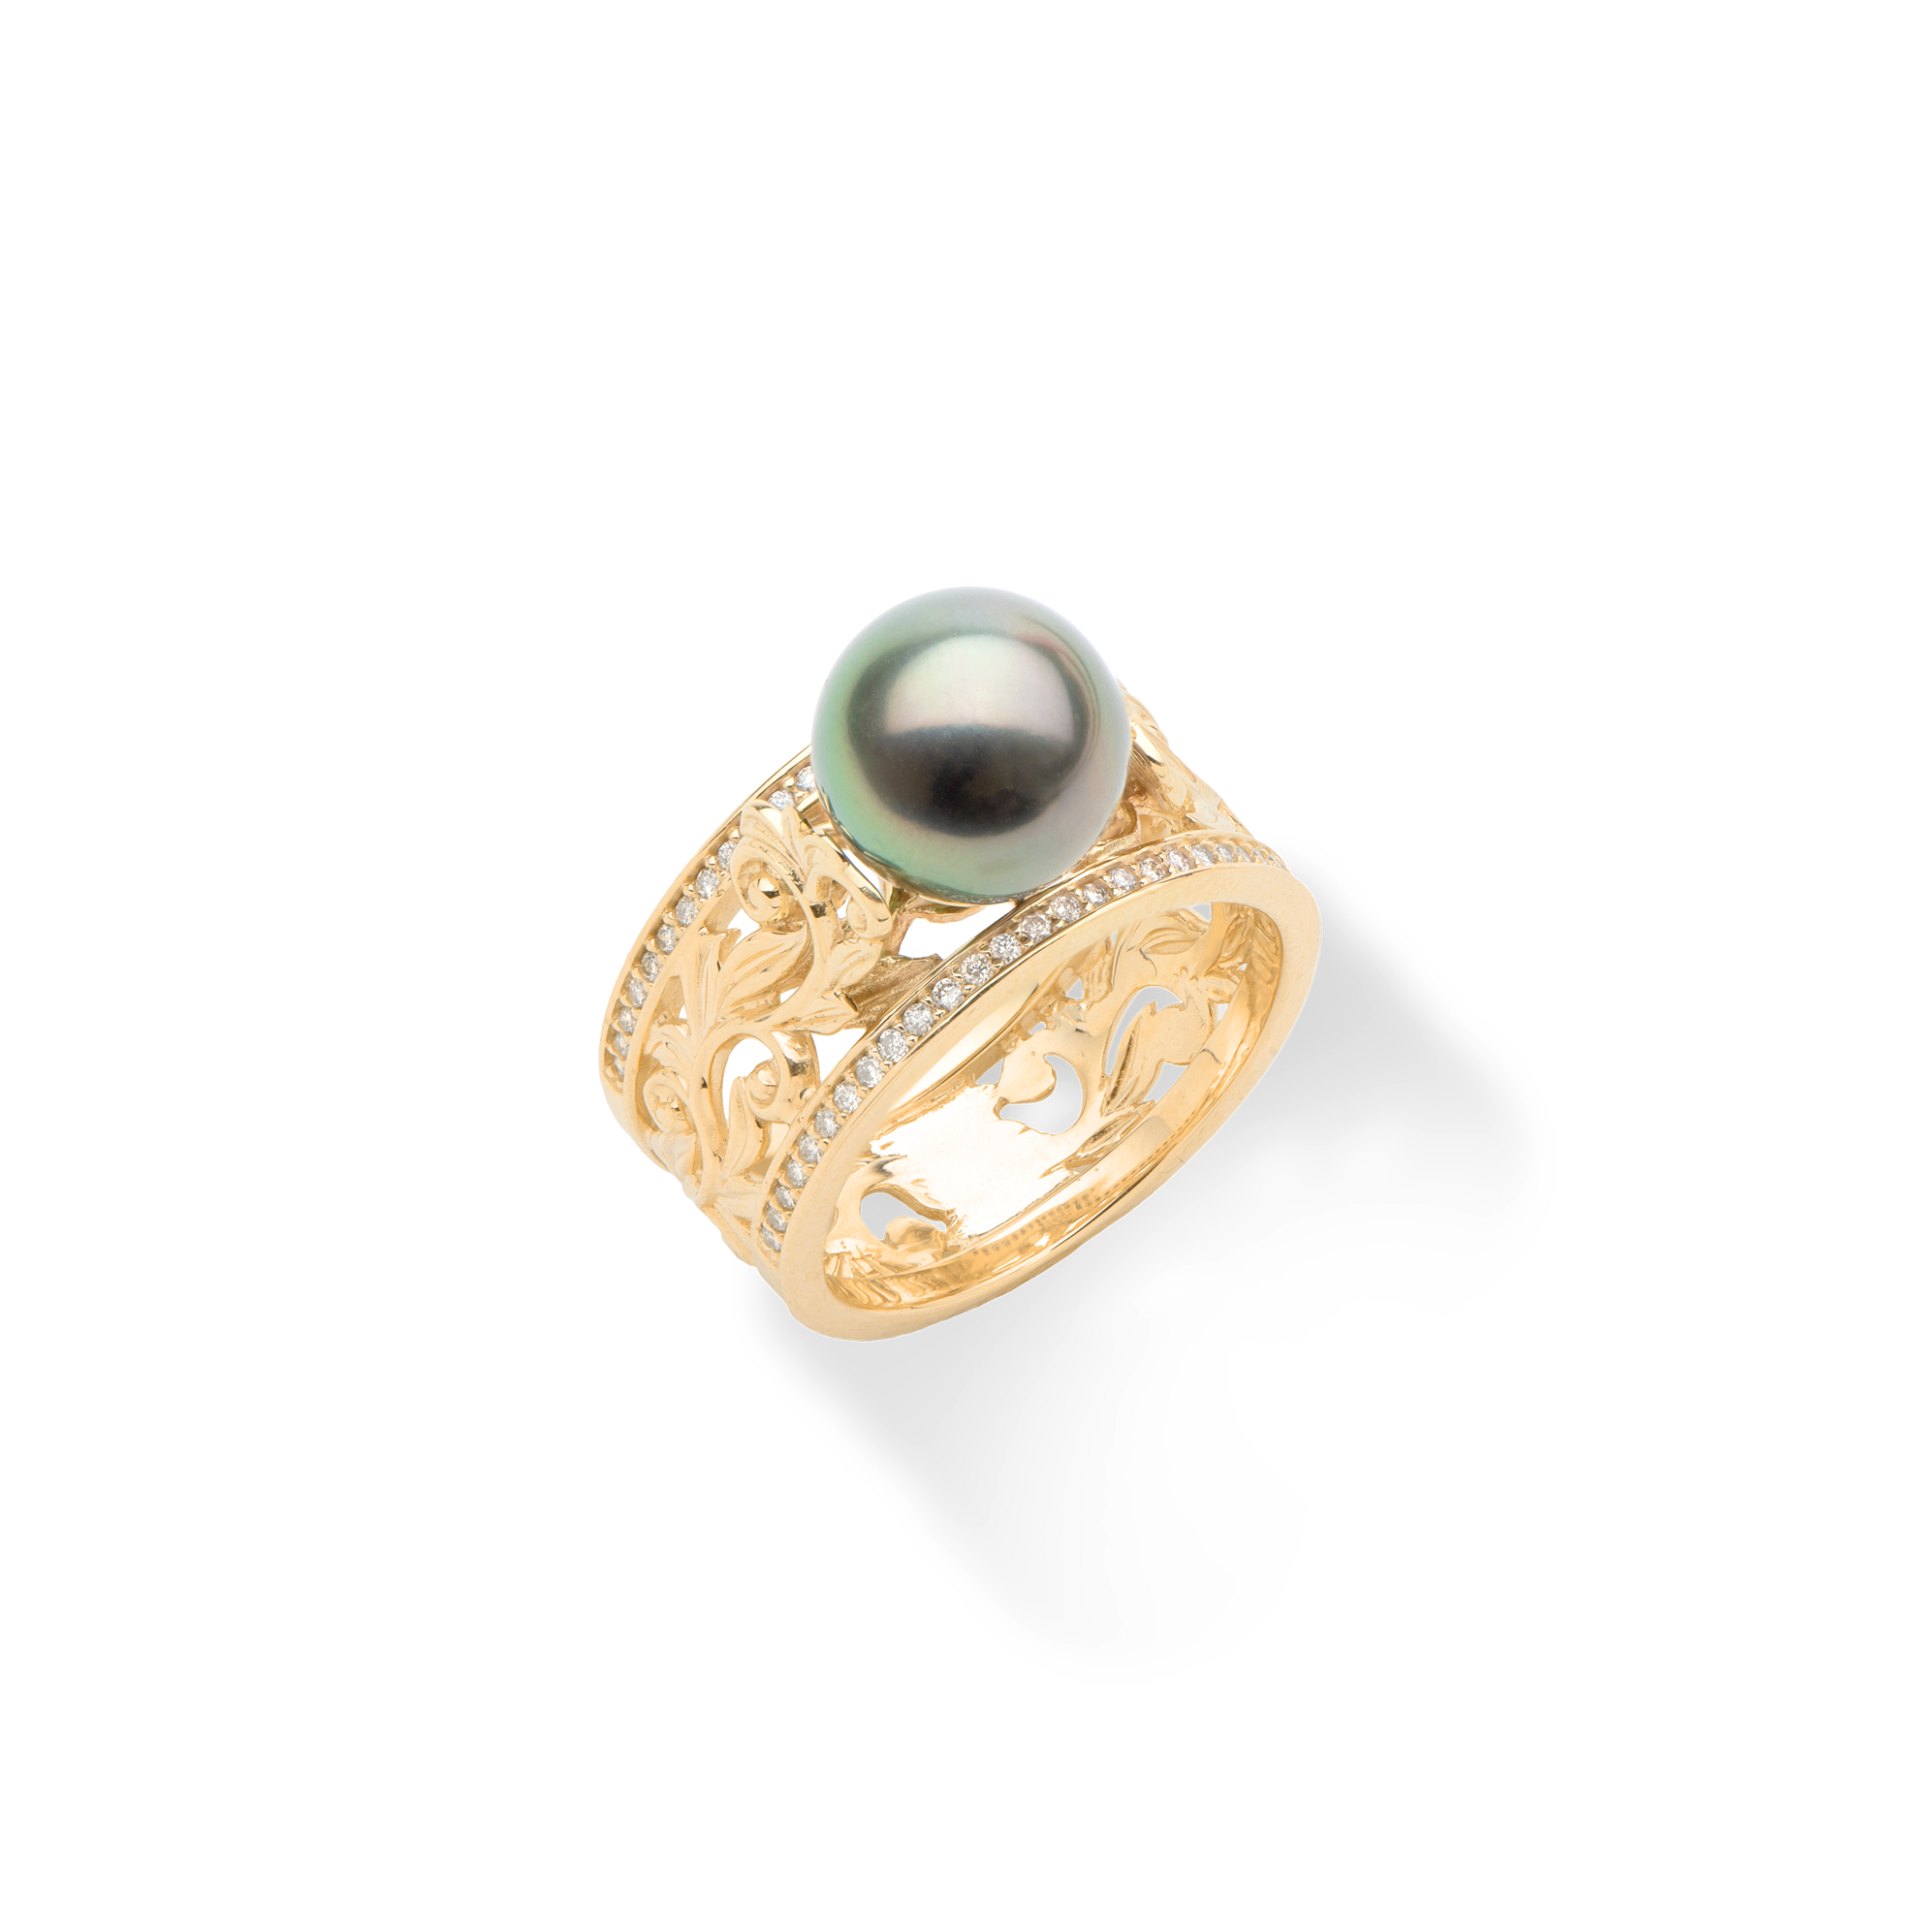 Living Heirloom Tahitian Black Pearl Ring in Gold with Diamonds - 10mm